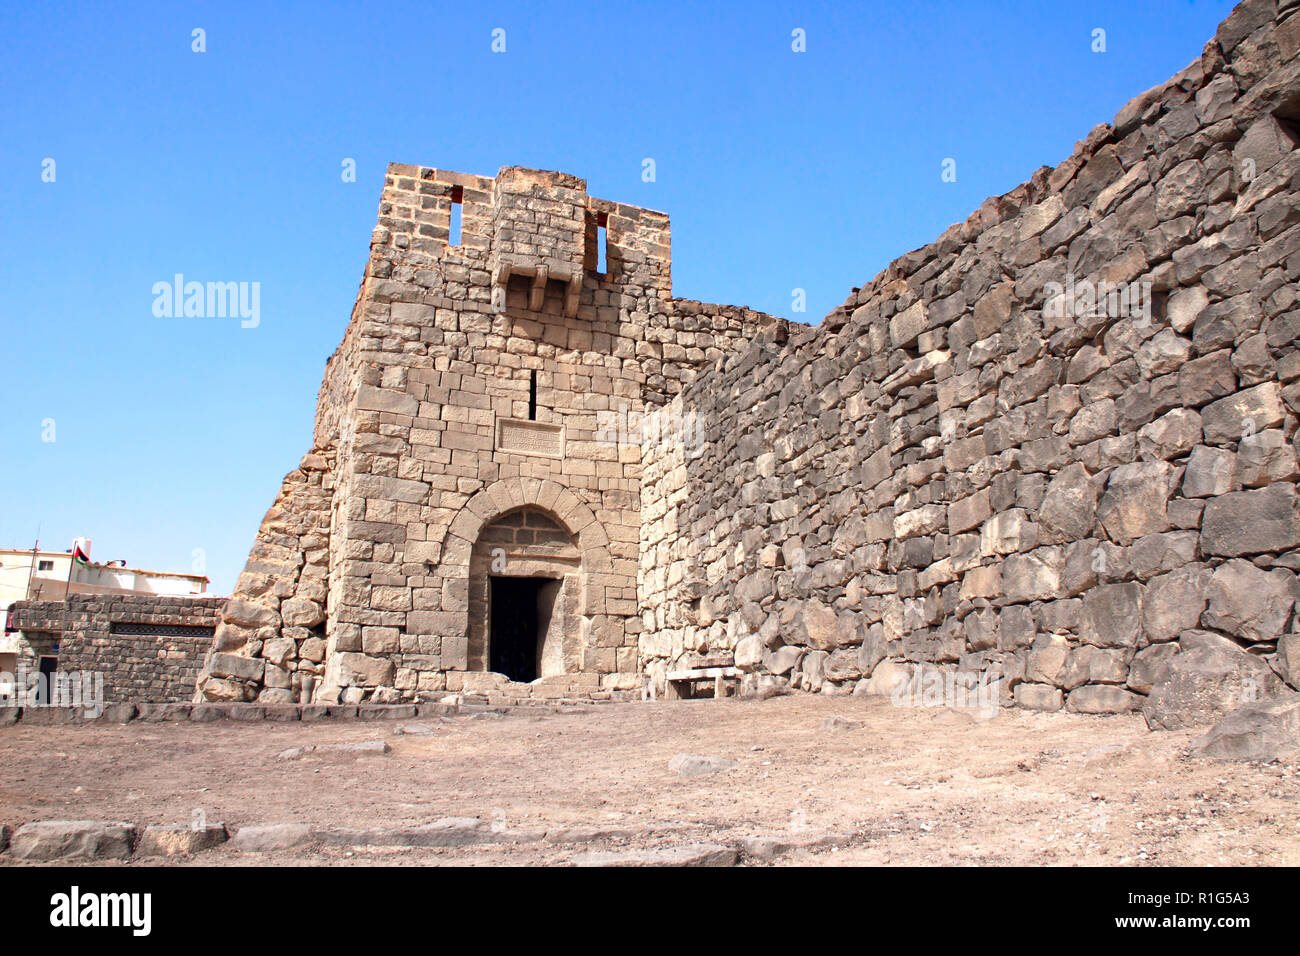 Qasr al-Azraq (is one of the Desert castles) - medieval fort where Thomas Edward Lawrence (Lawrence of Arabia) based his operations during the Arab Re Stock Photo